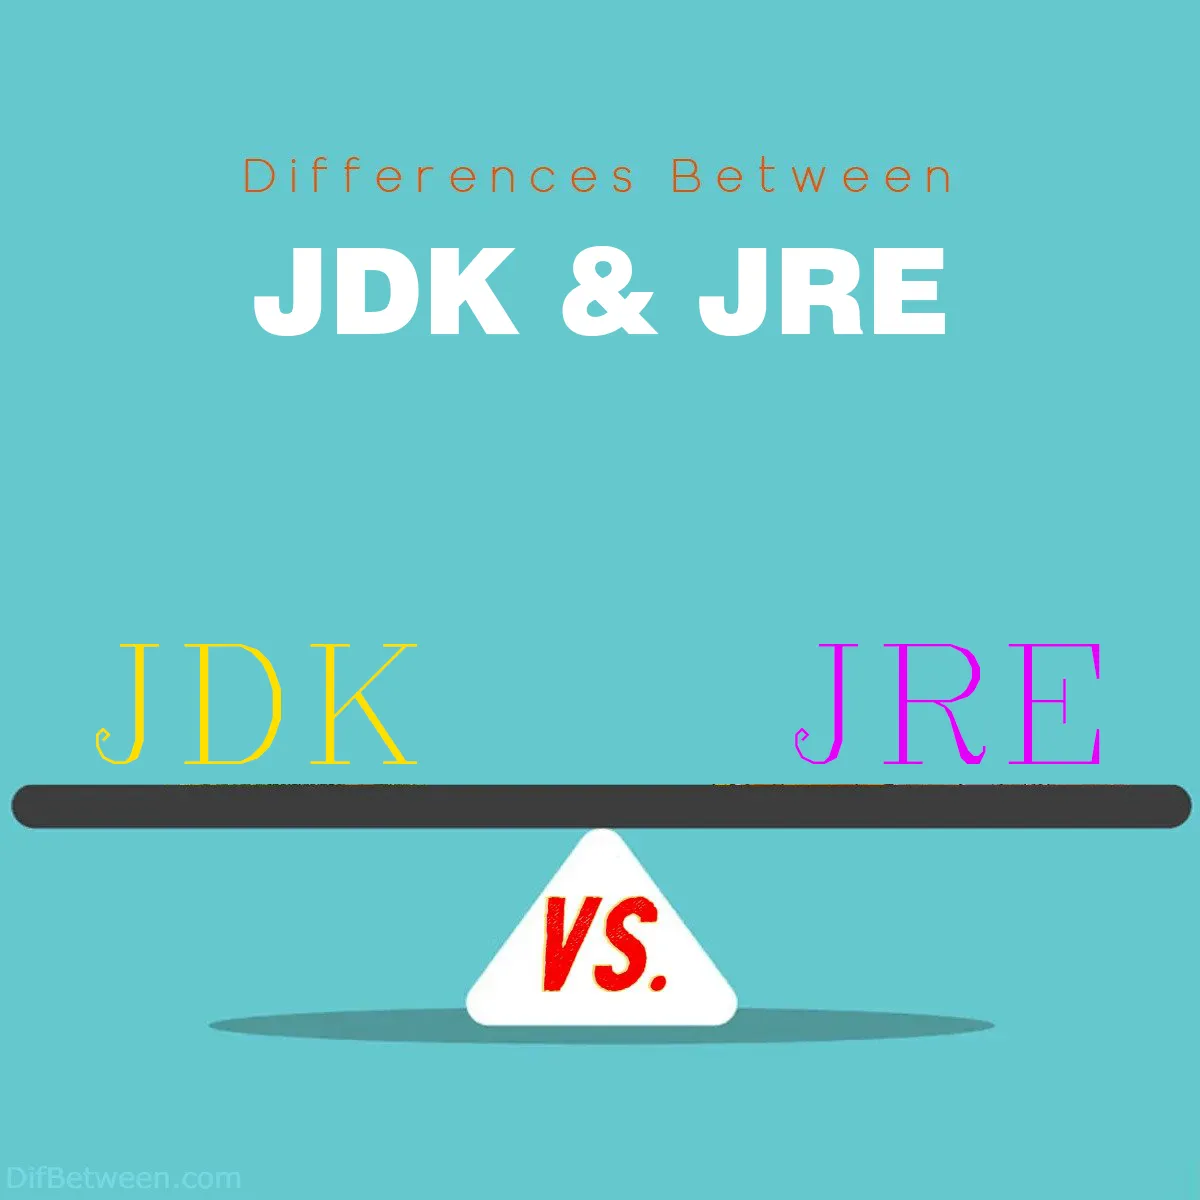 Differences Between JDK and JRE